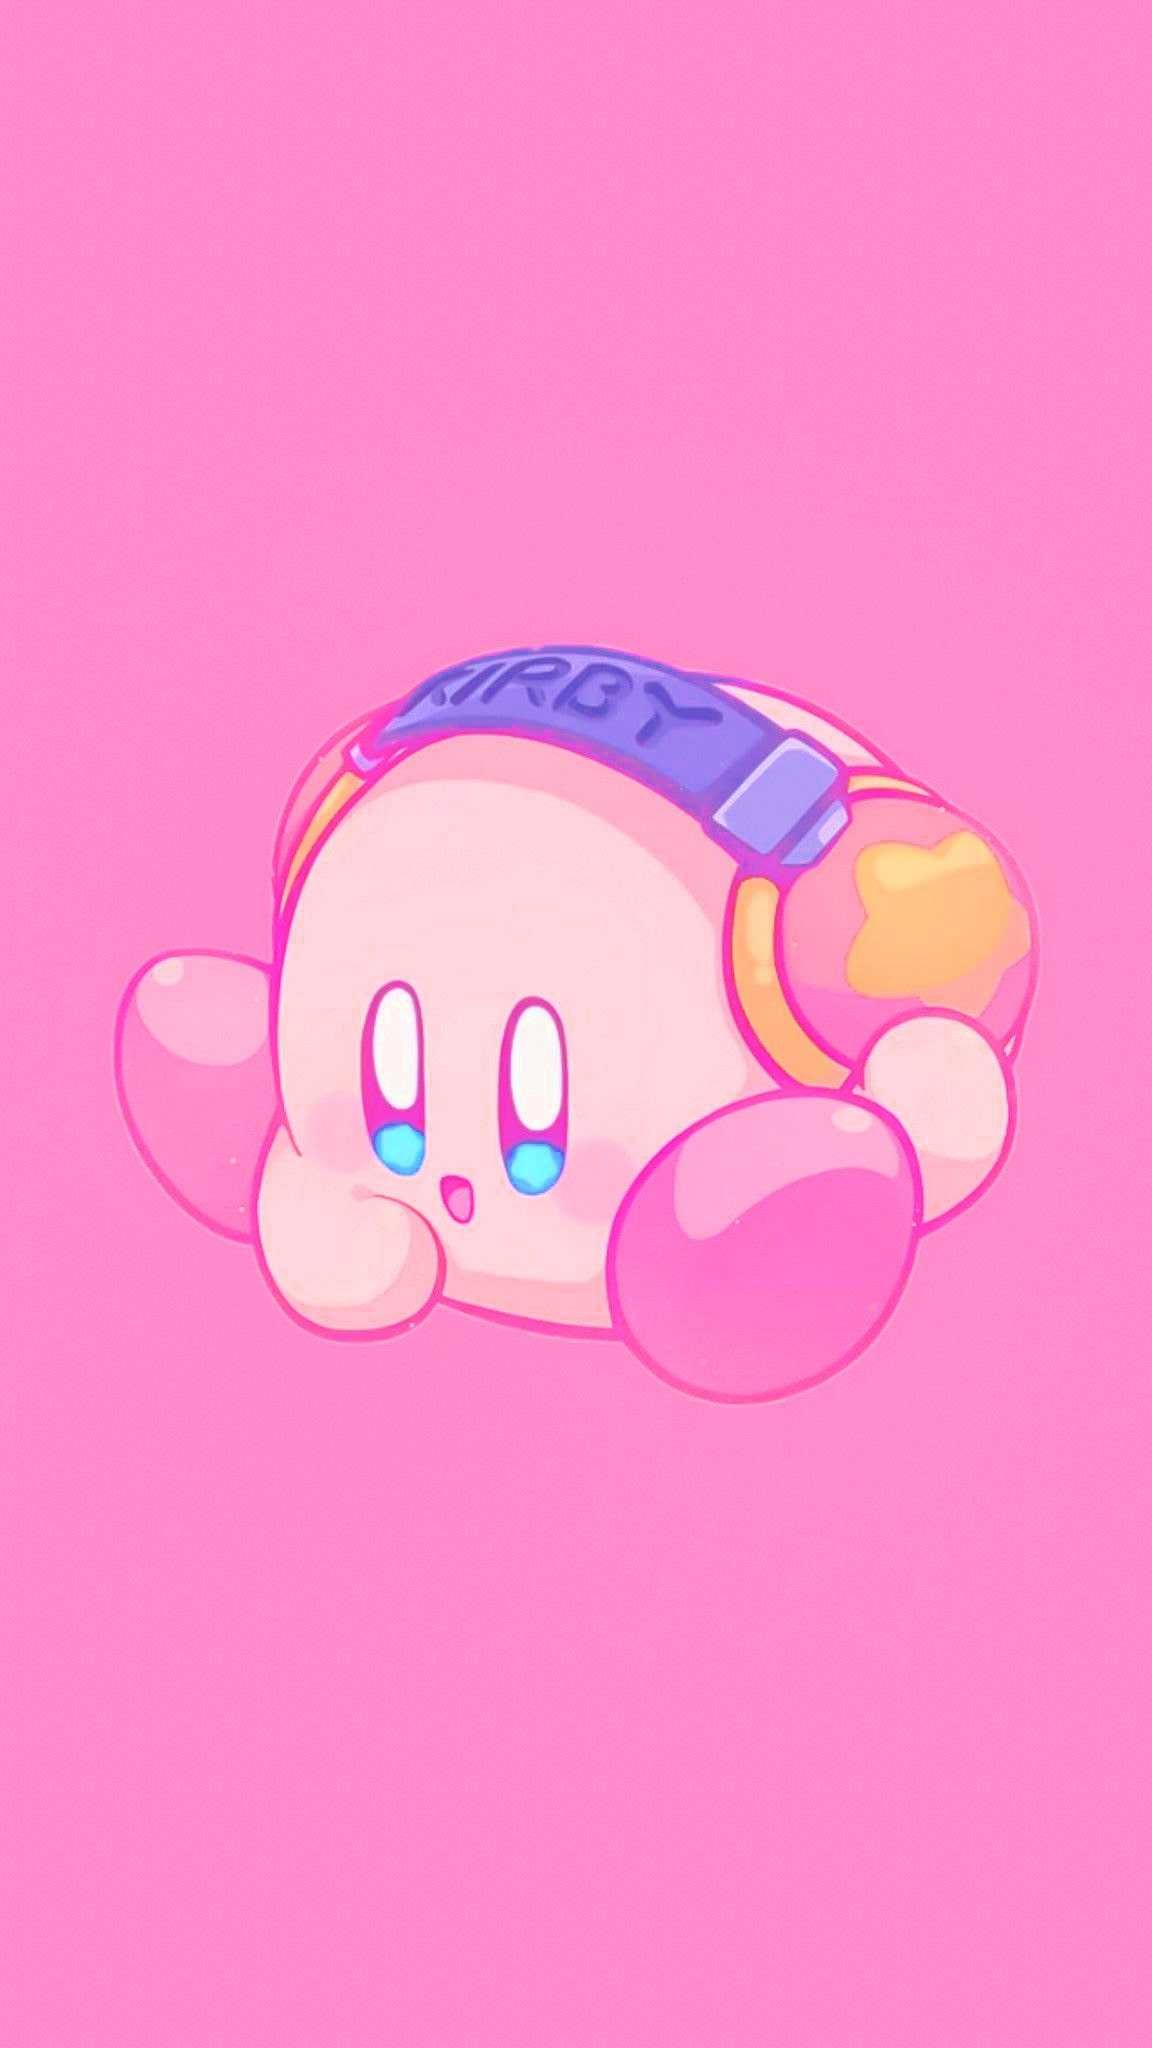 Nintendos LINE shares two more Kirby phone wallpapers uncompressed   Kirby character Kirby art nintendo Kirby games